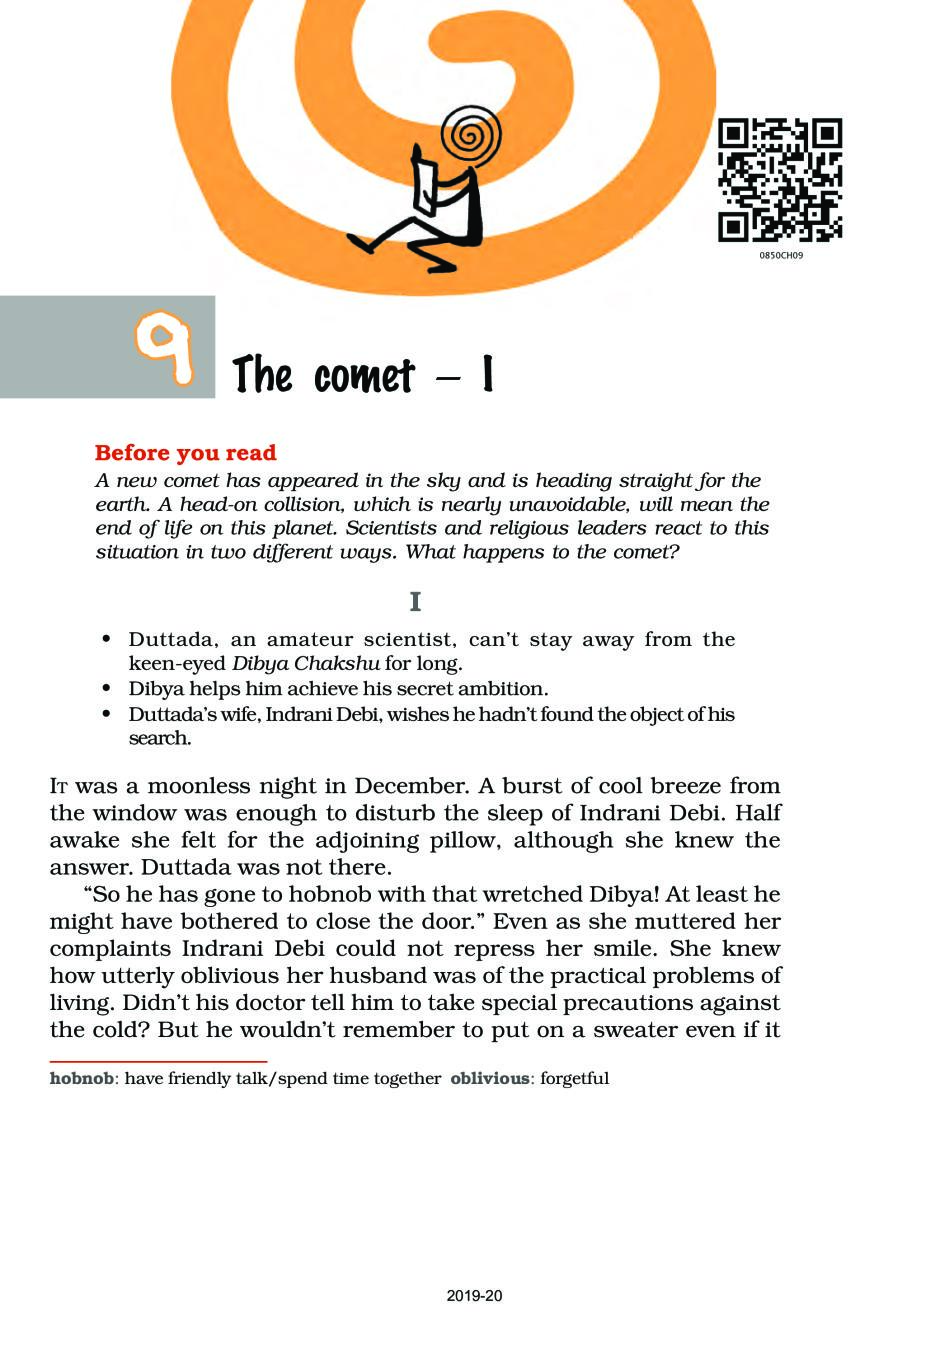 NCERT Book Class 8 English (It So Happened) Chapter 9 The comet — I - Page 1